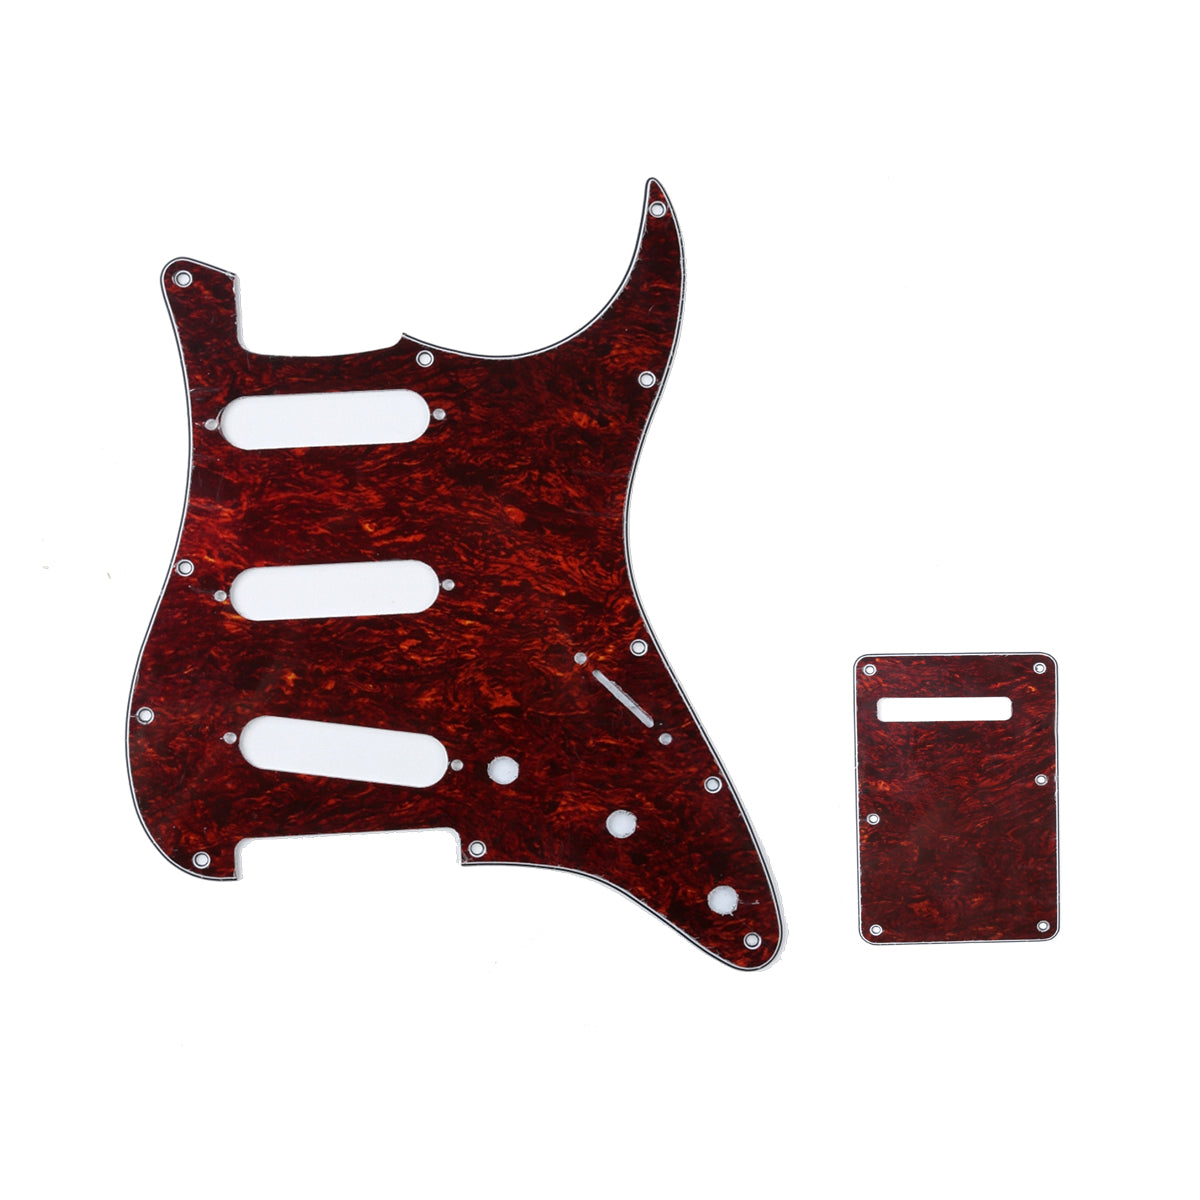 Musiclily SSS 11 Hole Strat Guitar Pickguard and BackPlate Set for Fender USA/Mexican Standard Stratocaster Modern Style, 4Ply Red Tortoise